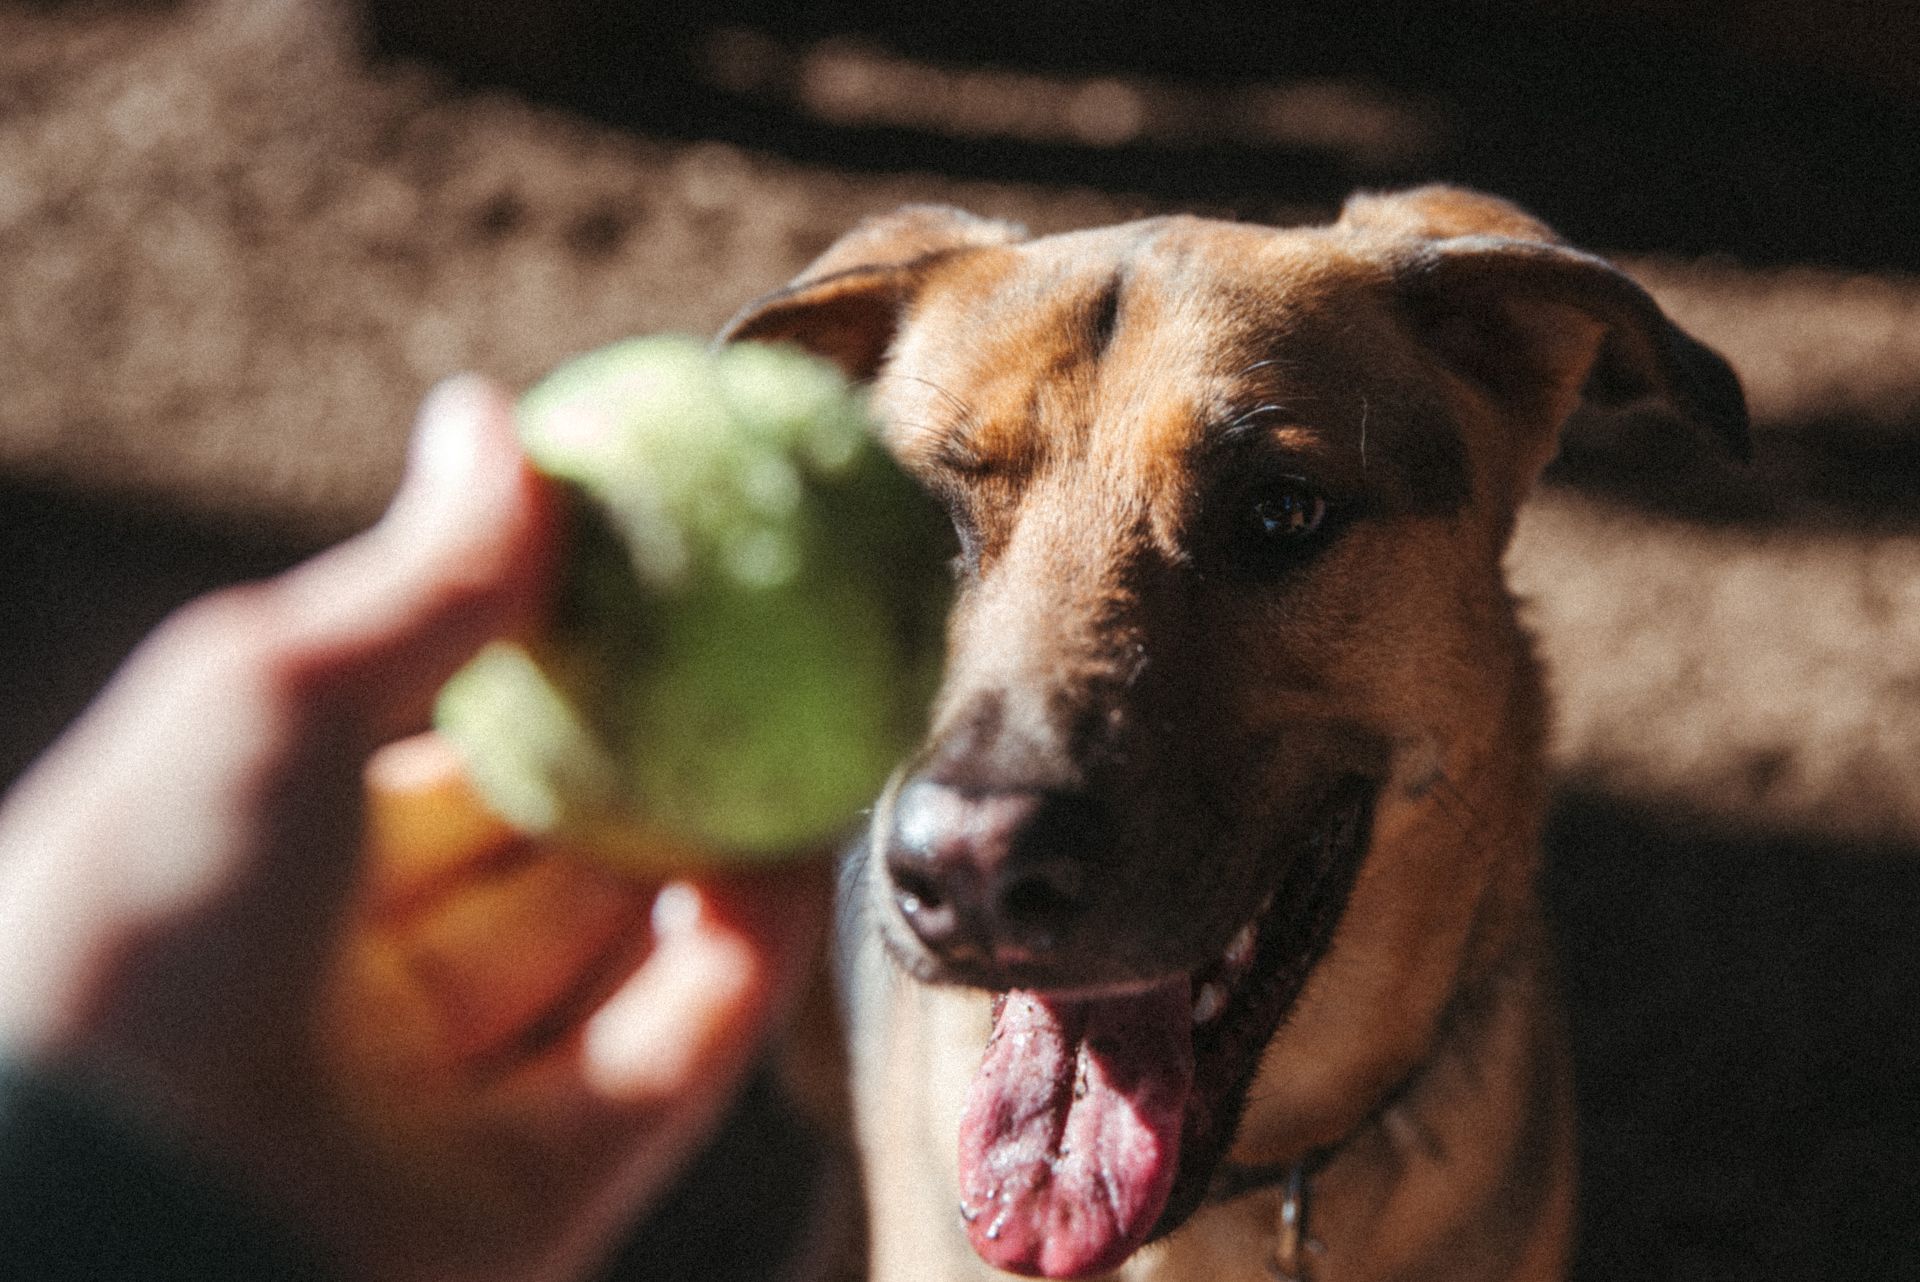 Close up of dog staring at a person's hand holding a tennis ball